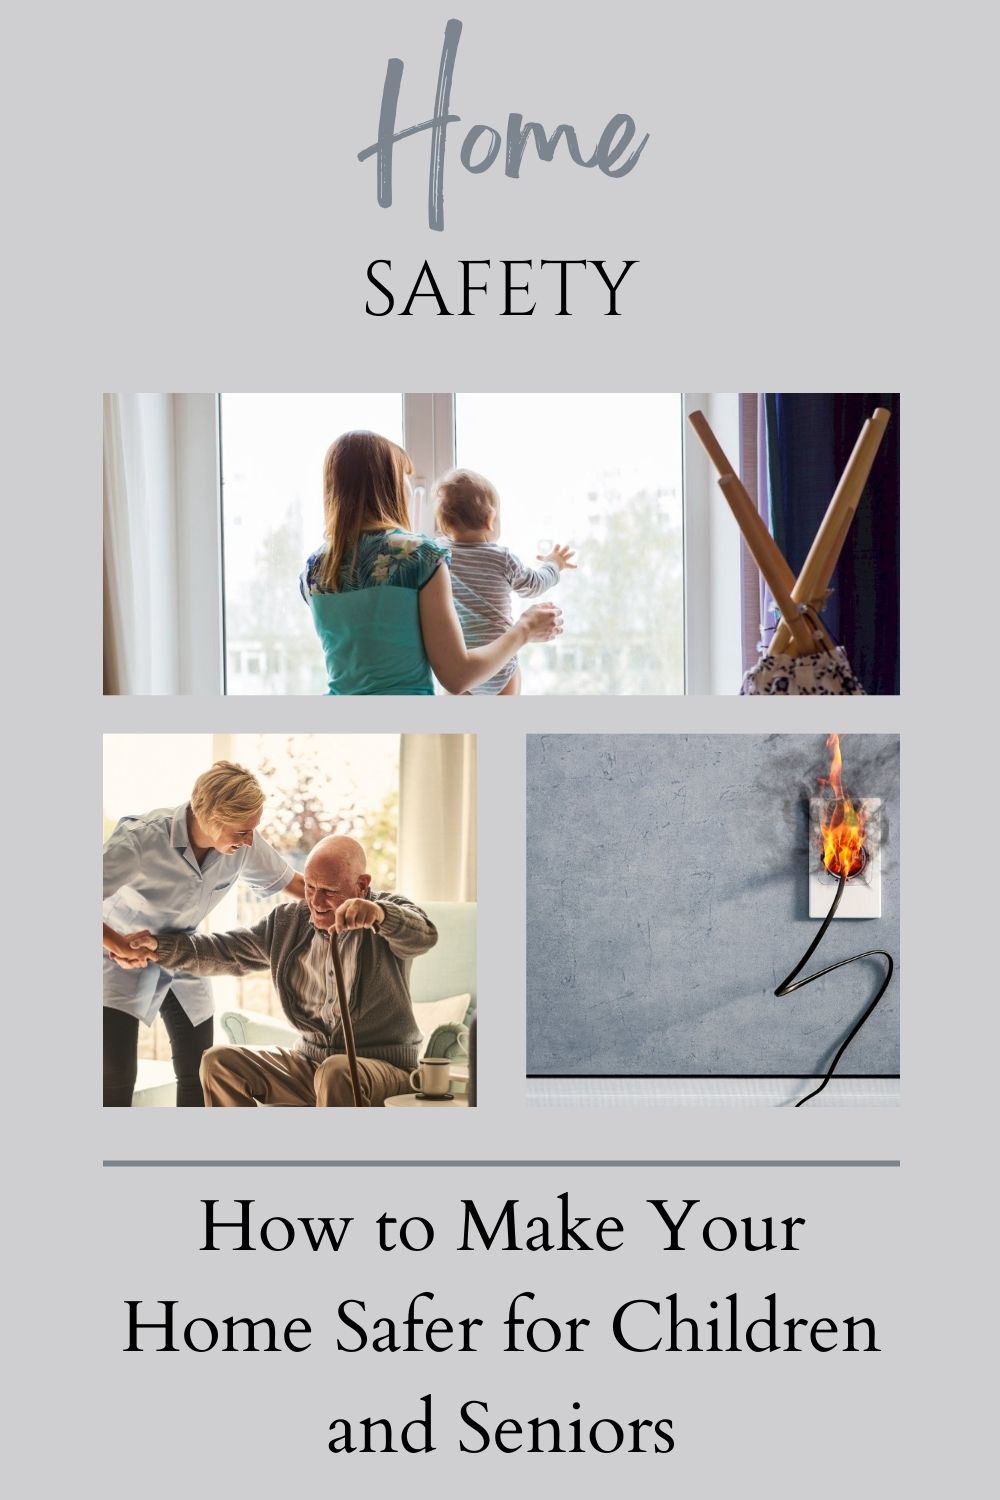 When you live with children or seniors in your home, their safety must be your top priority. Here are some tips to help you do just that.